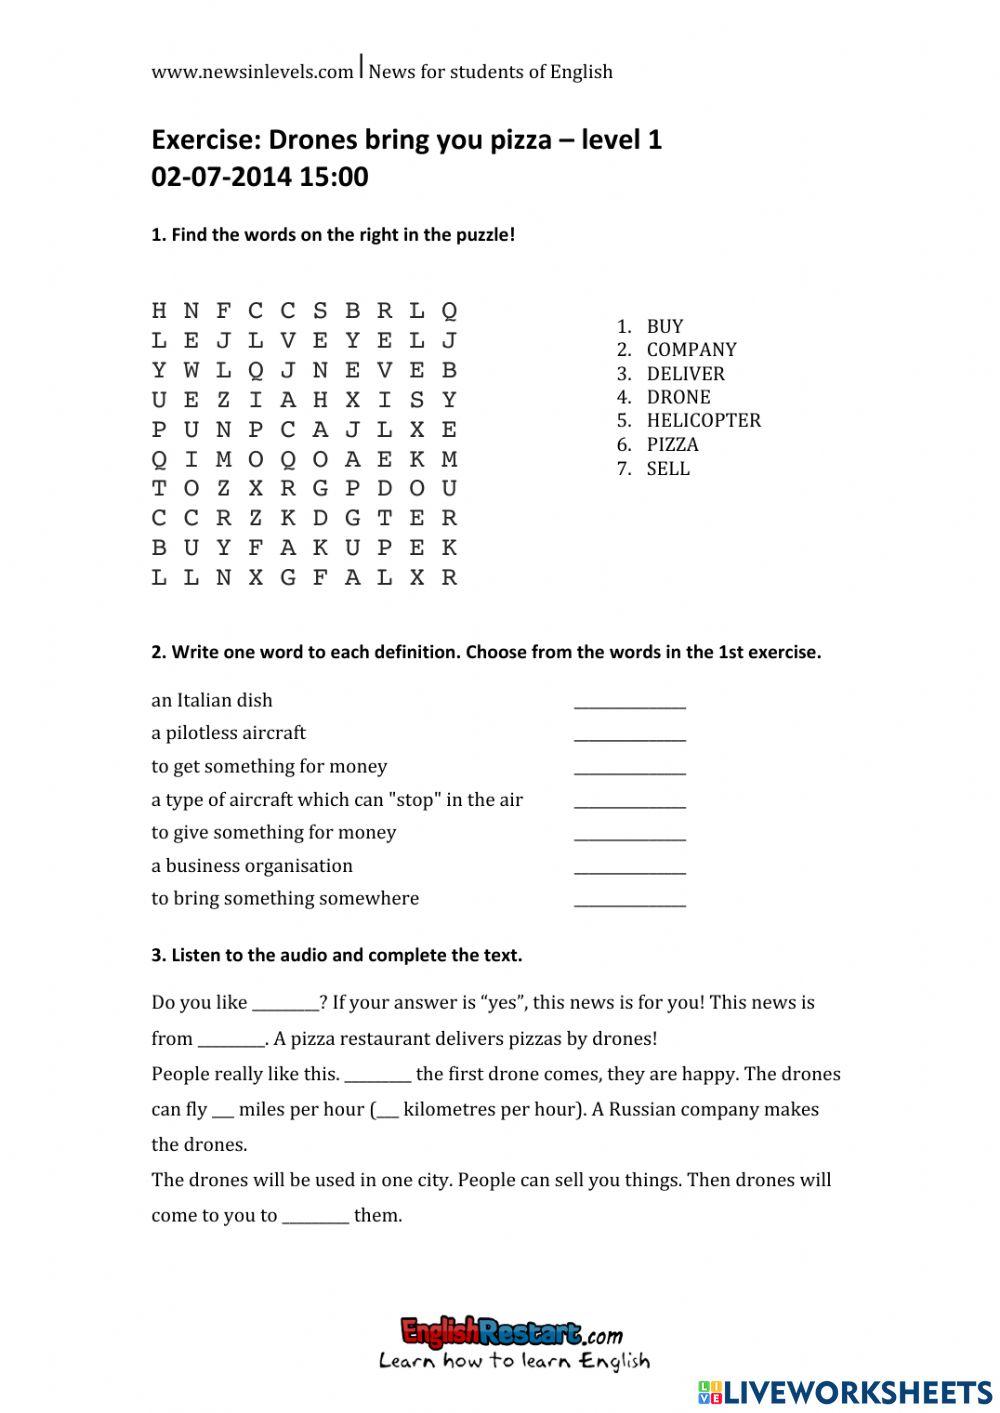 General vocabulary interactive exercise | Live Worksheets